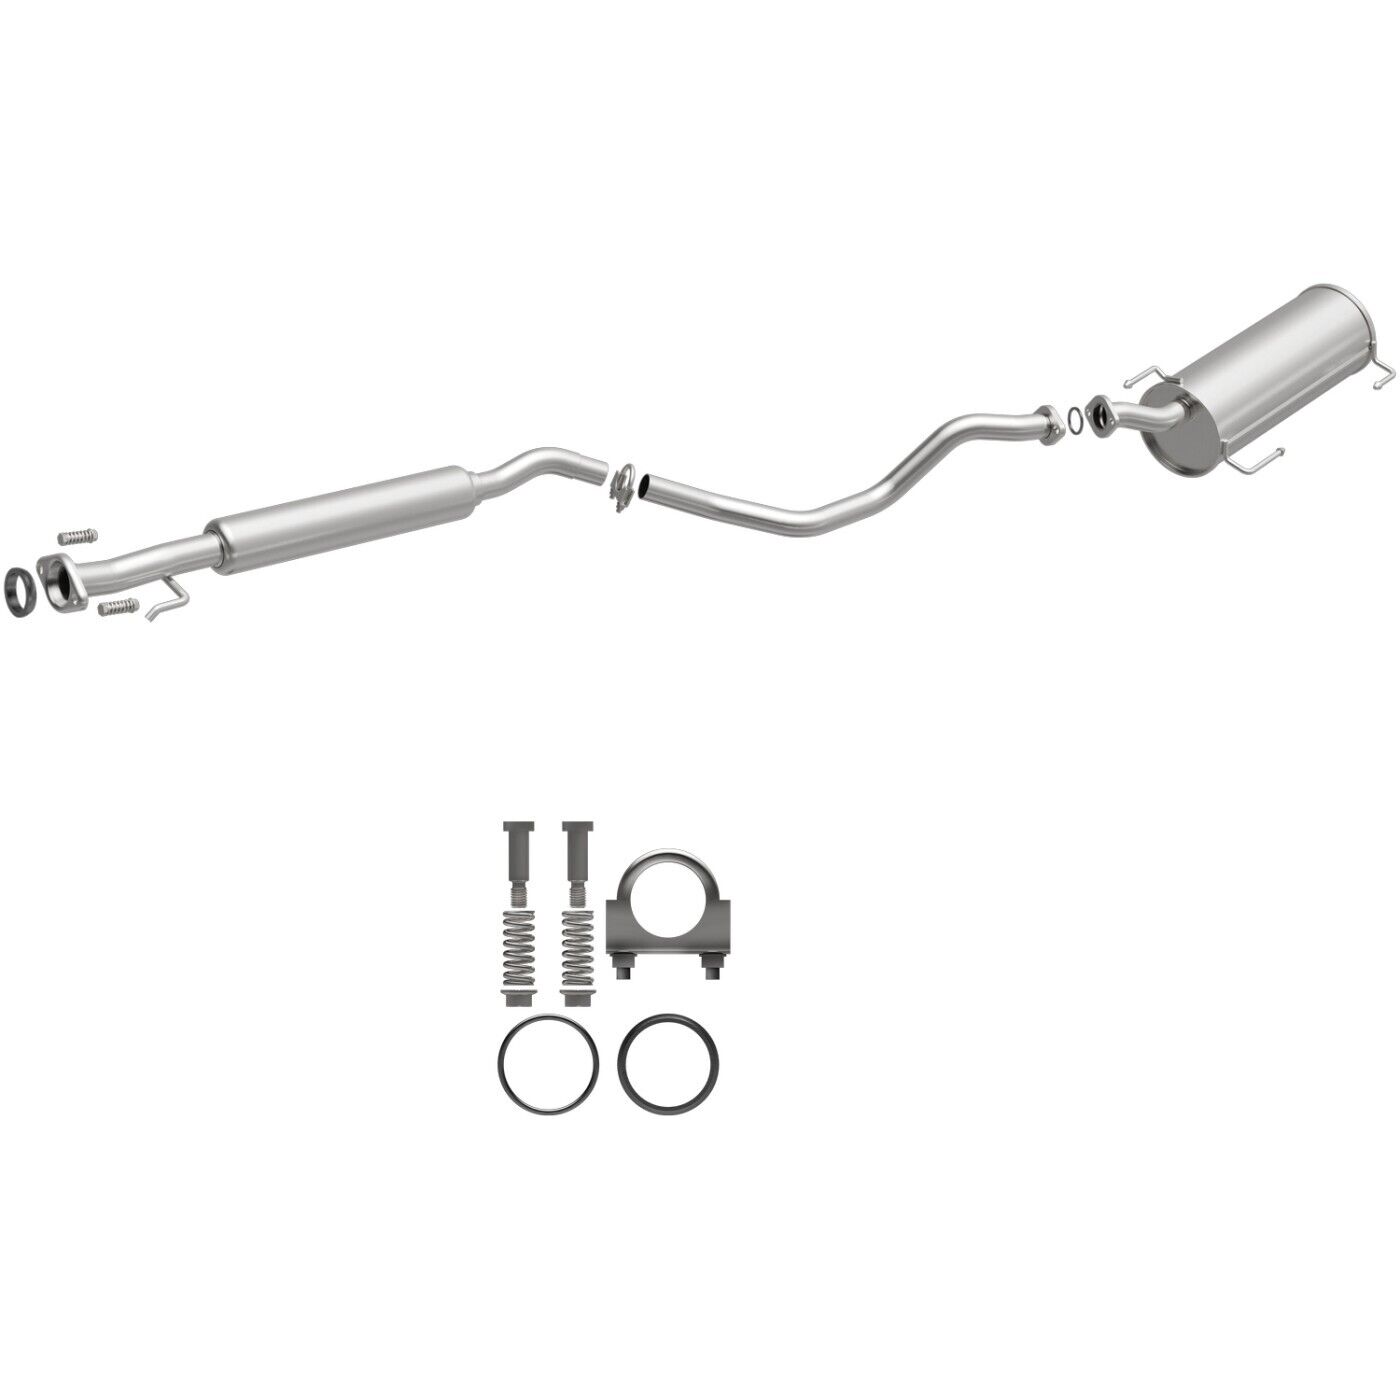 BRExhaust 106-0057 Exhaust Systems for Nissan Versa 2007-2012